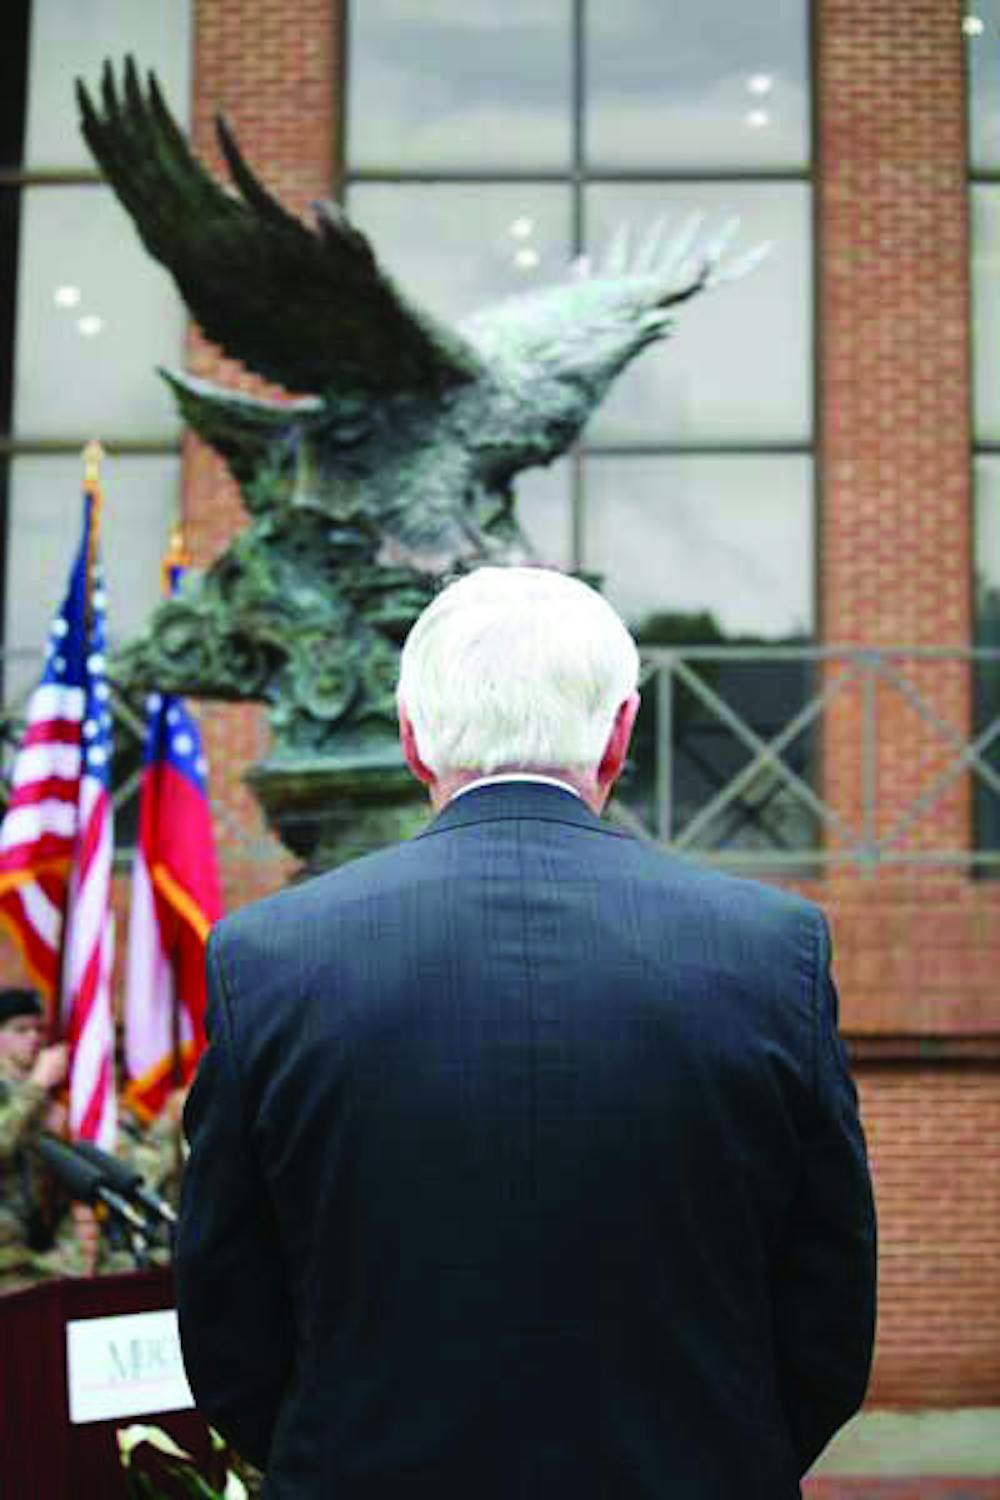 The “Bill of Rights Eagle” statue was gifted to Mercer University by alumni, Lt. Gen. Claude “Mick” Kicklighter.